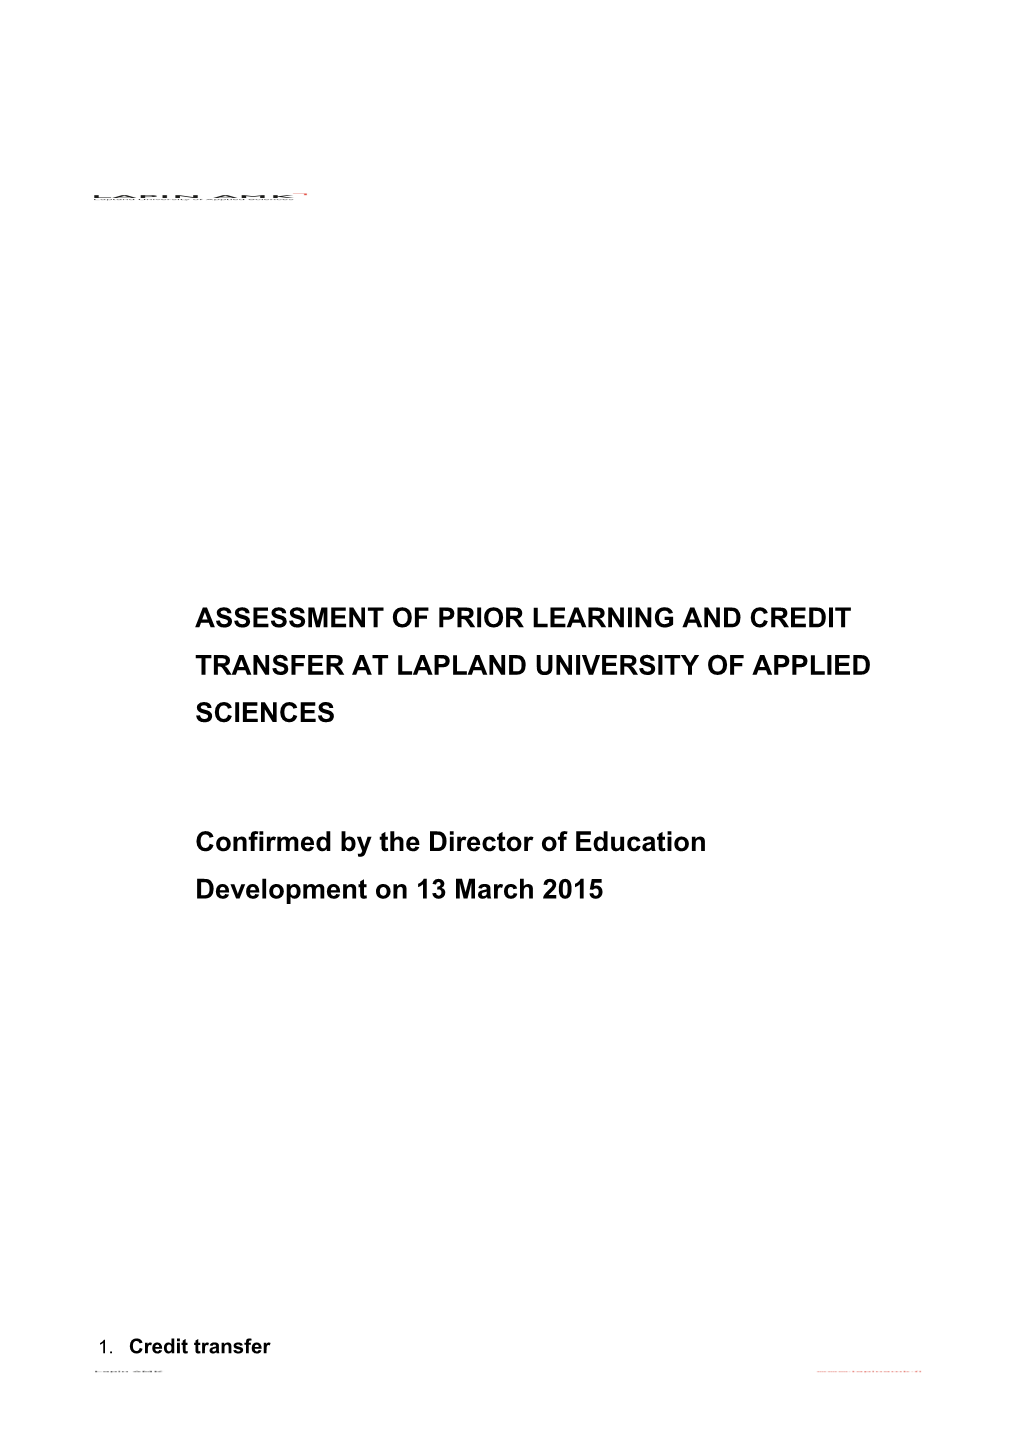 Lapland UAS - Assessment of Prior Learning and Credit Transfer at Lapland UAS